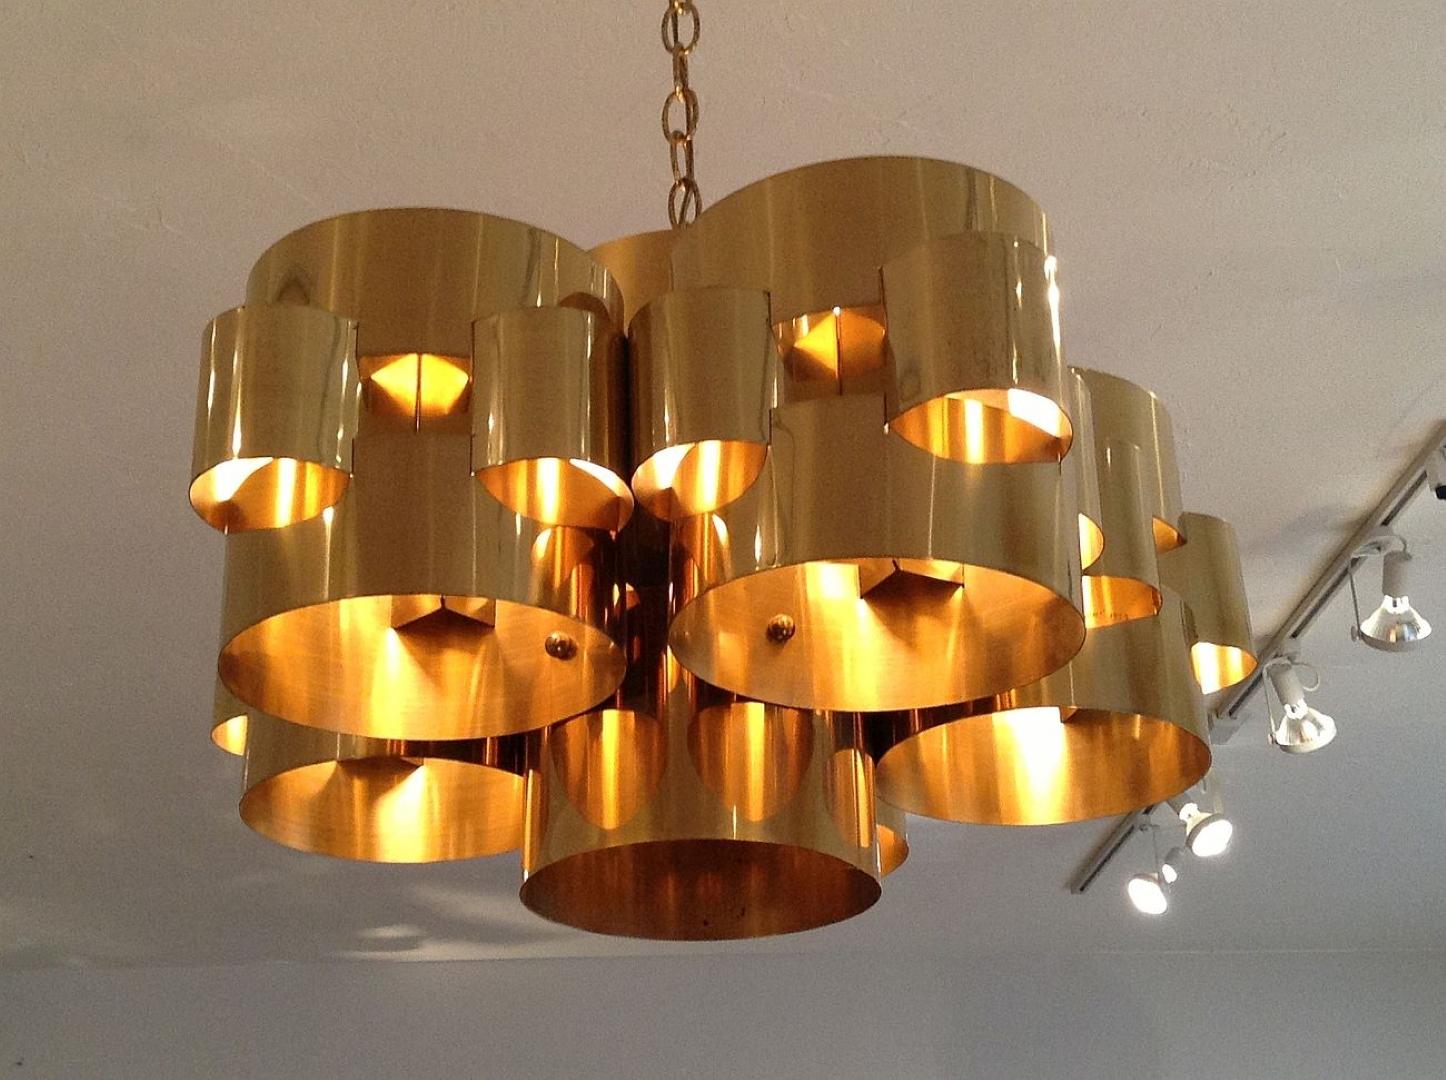 Mid-Century Modern Polished Brass Cloud Chandelier by Curtis Jere, circa 1975 For Sale